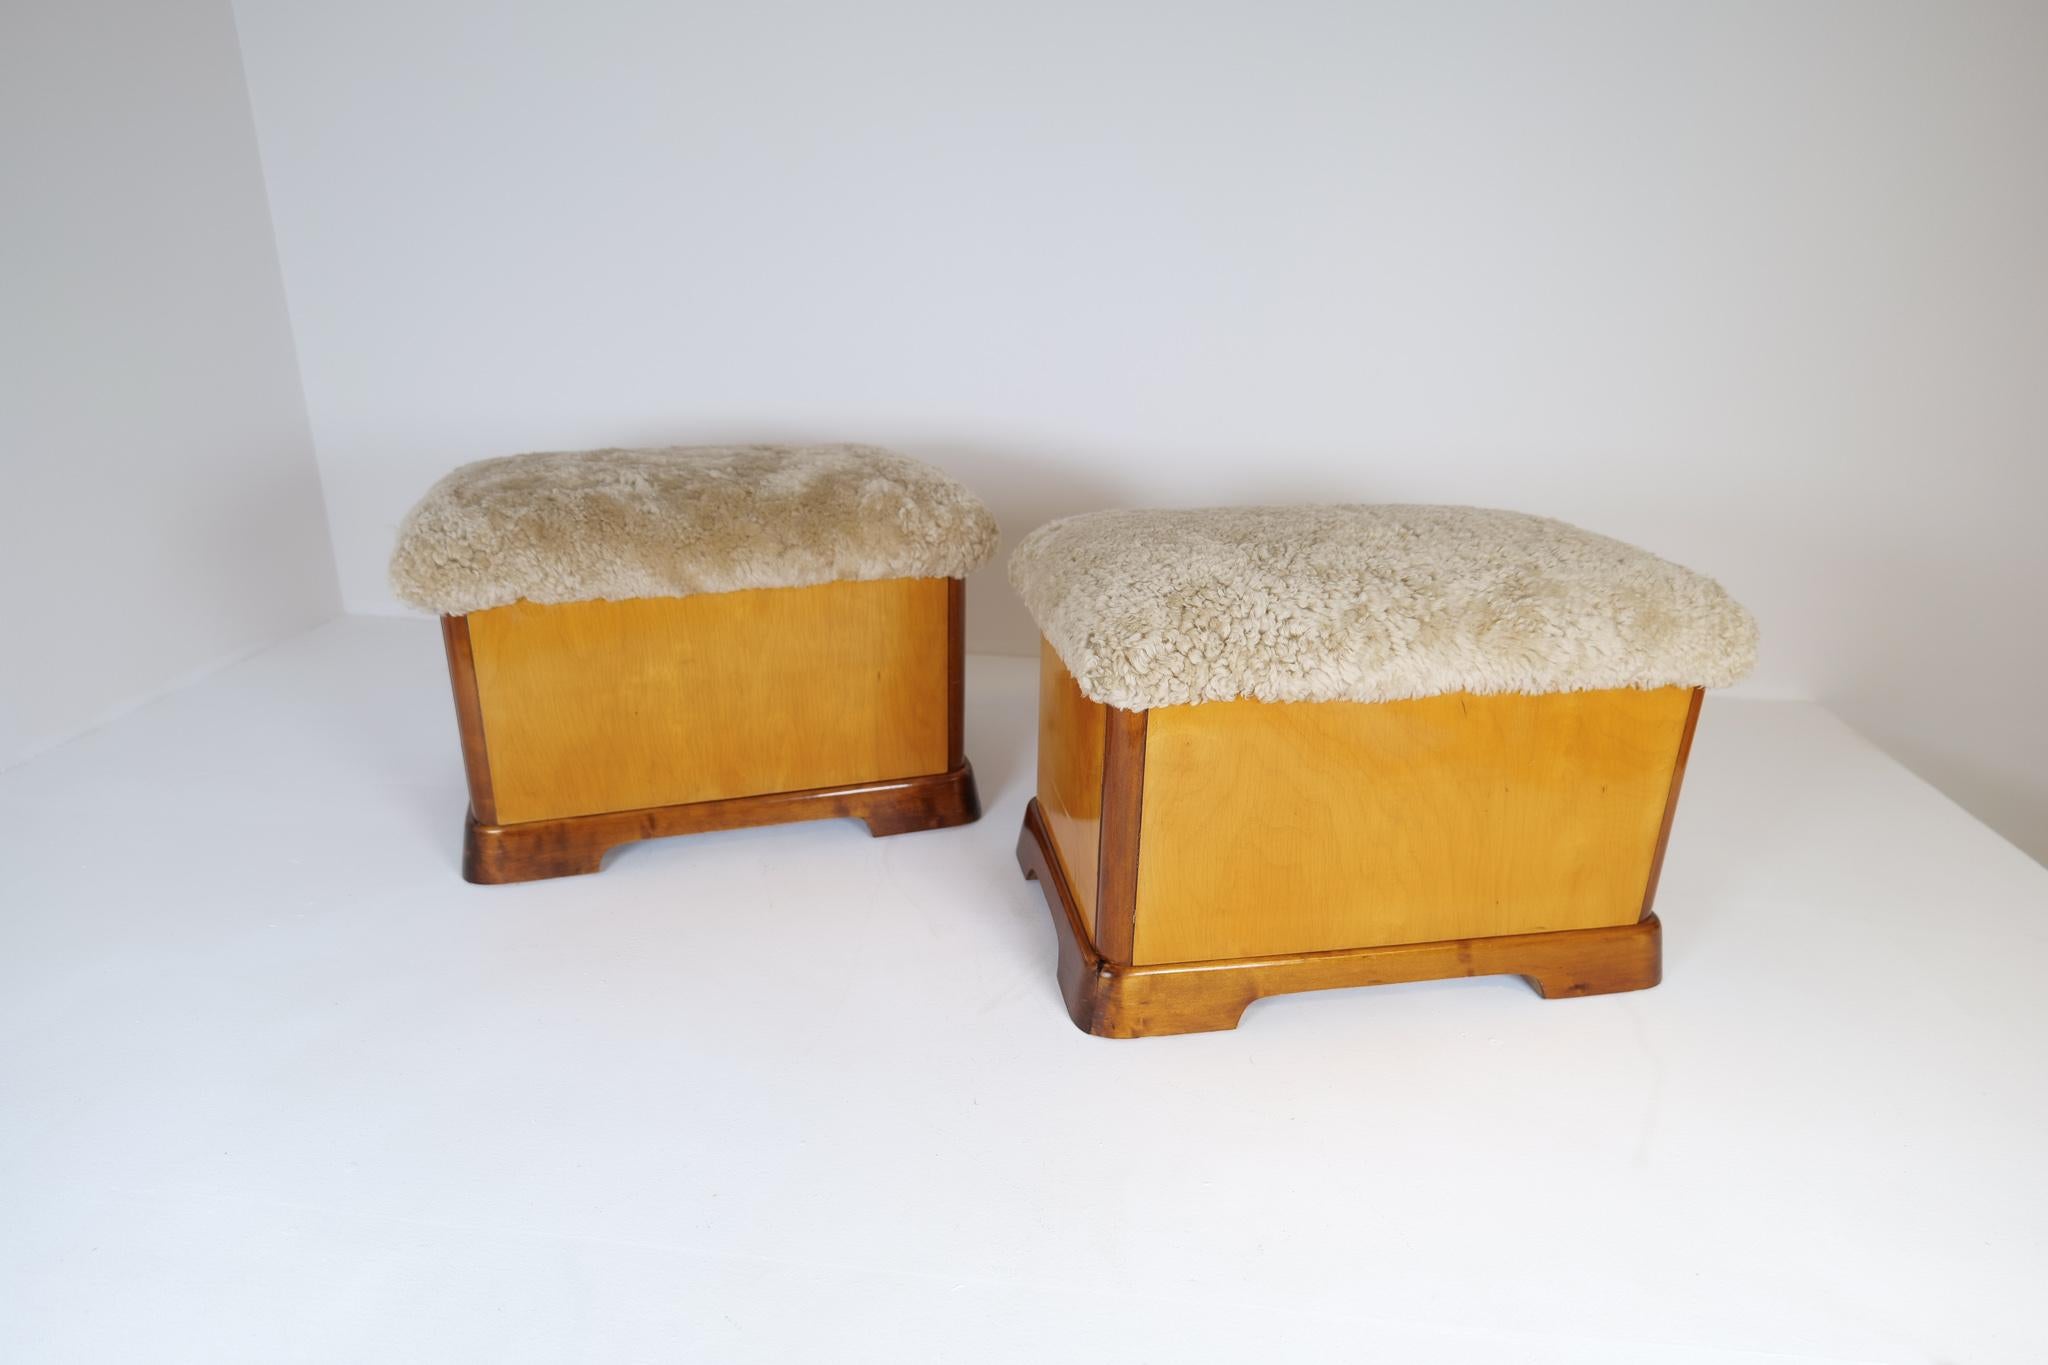 Swedish Art Deco Stools in Lacquered Birch and Sheepskin/Shearling Seat 1940s For Sale 1